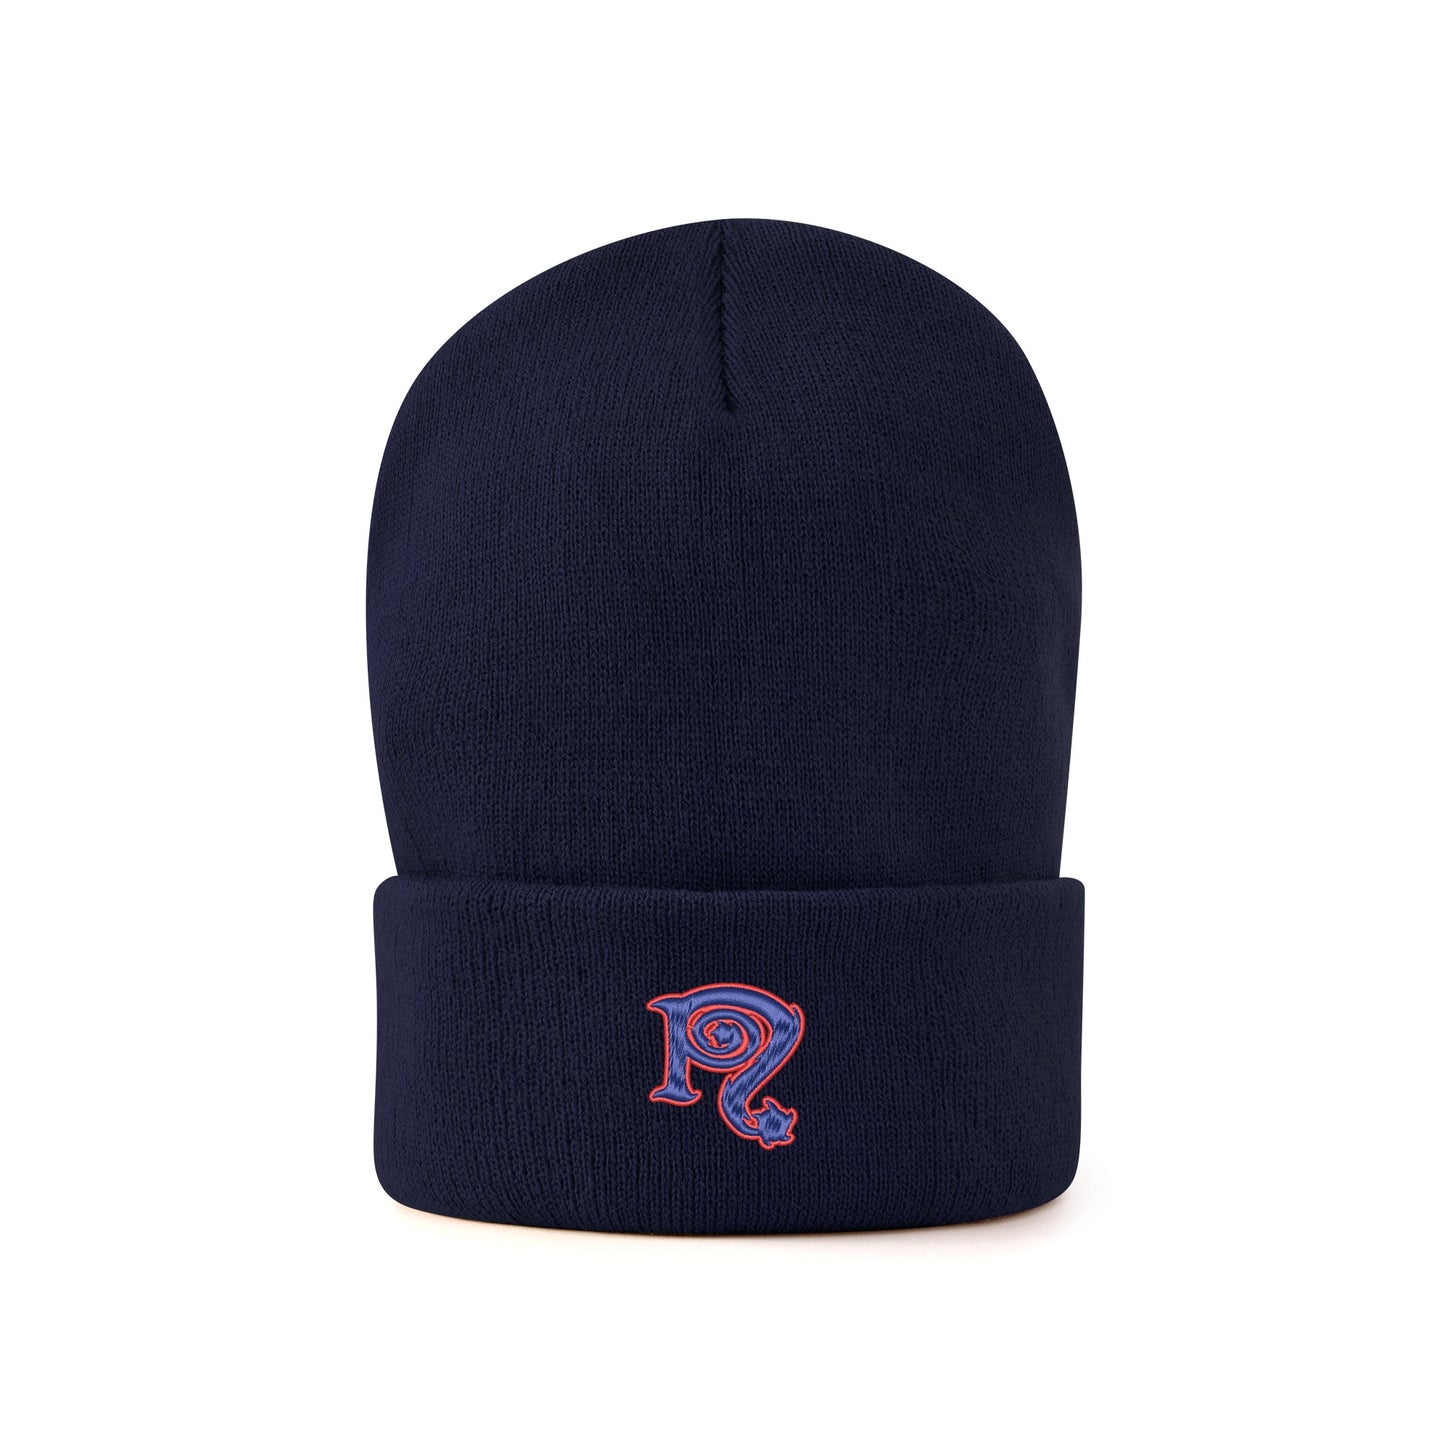 Necro - Red/Navy N Logo - Embroidered Knitted Hat